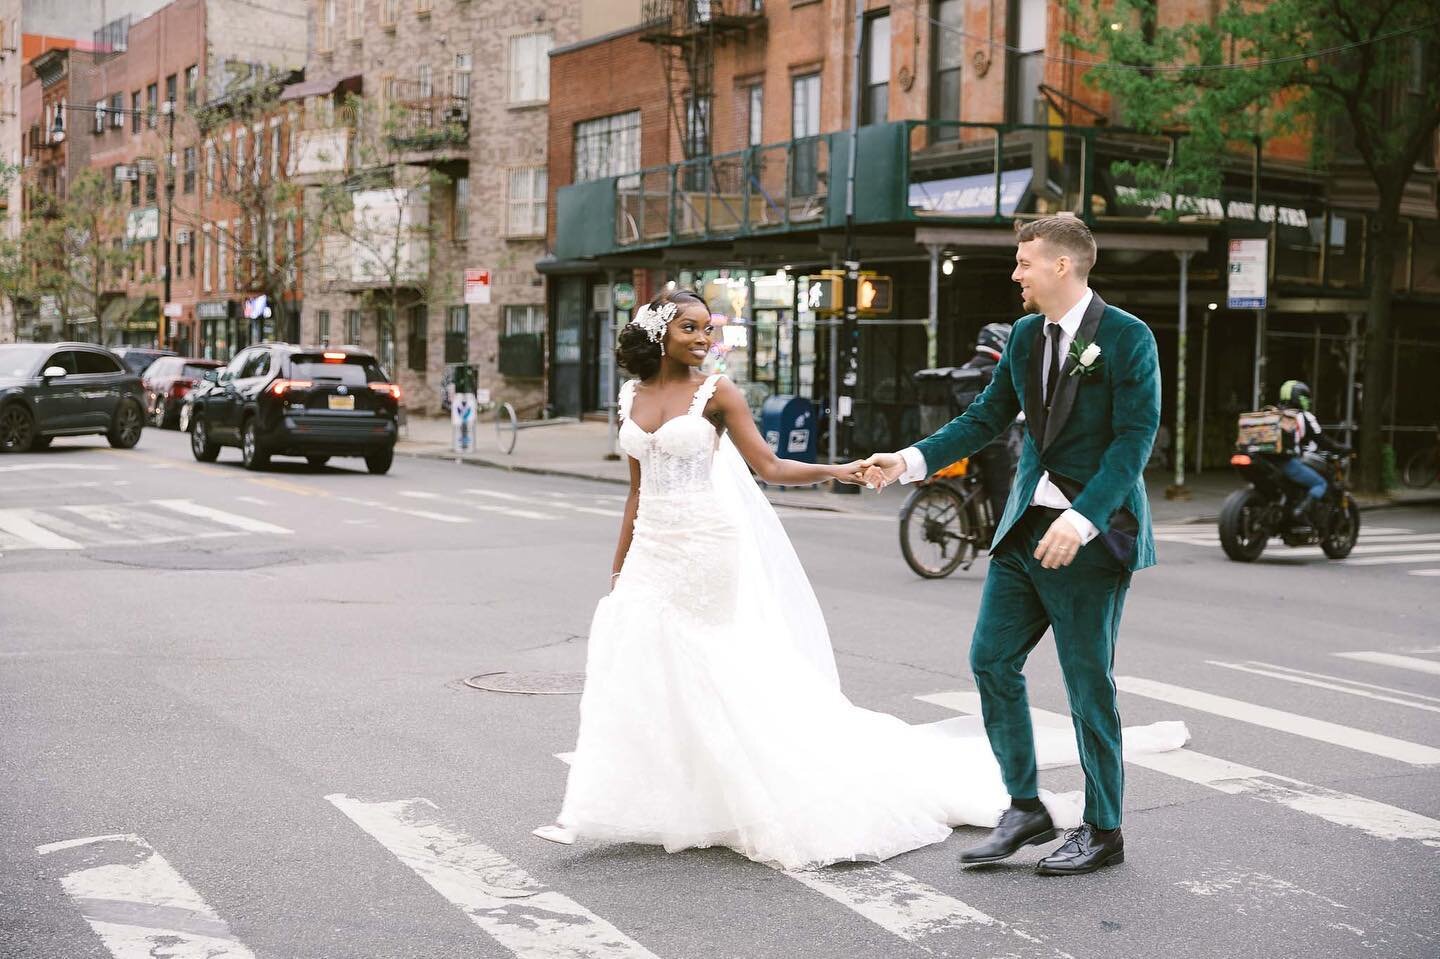 Hand in hand, heart to heart, forever in love. #CityLove #BrooklynVibes #WeddingBliss